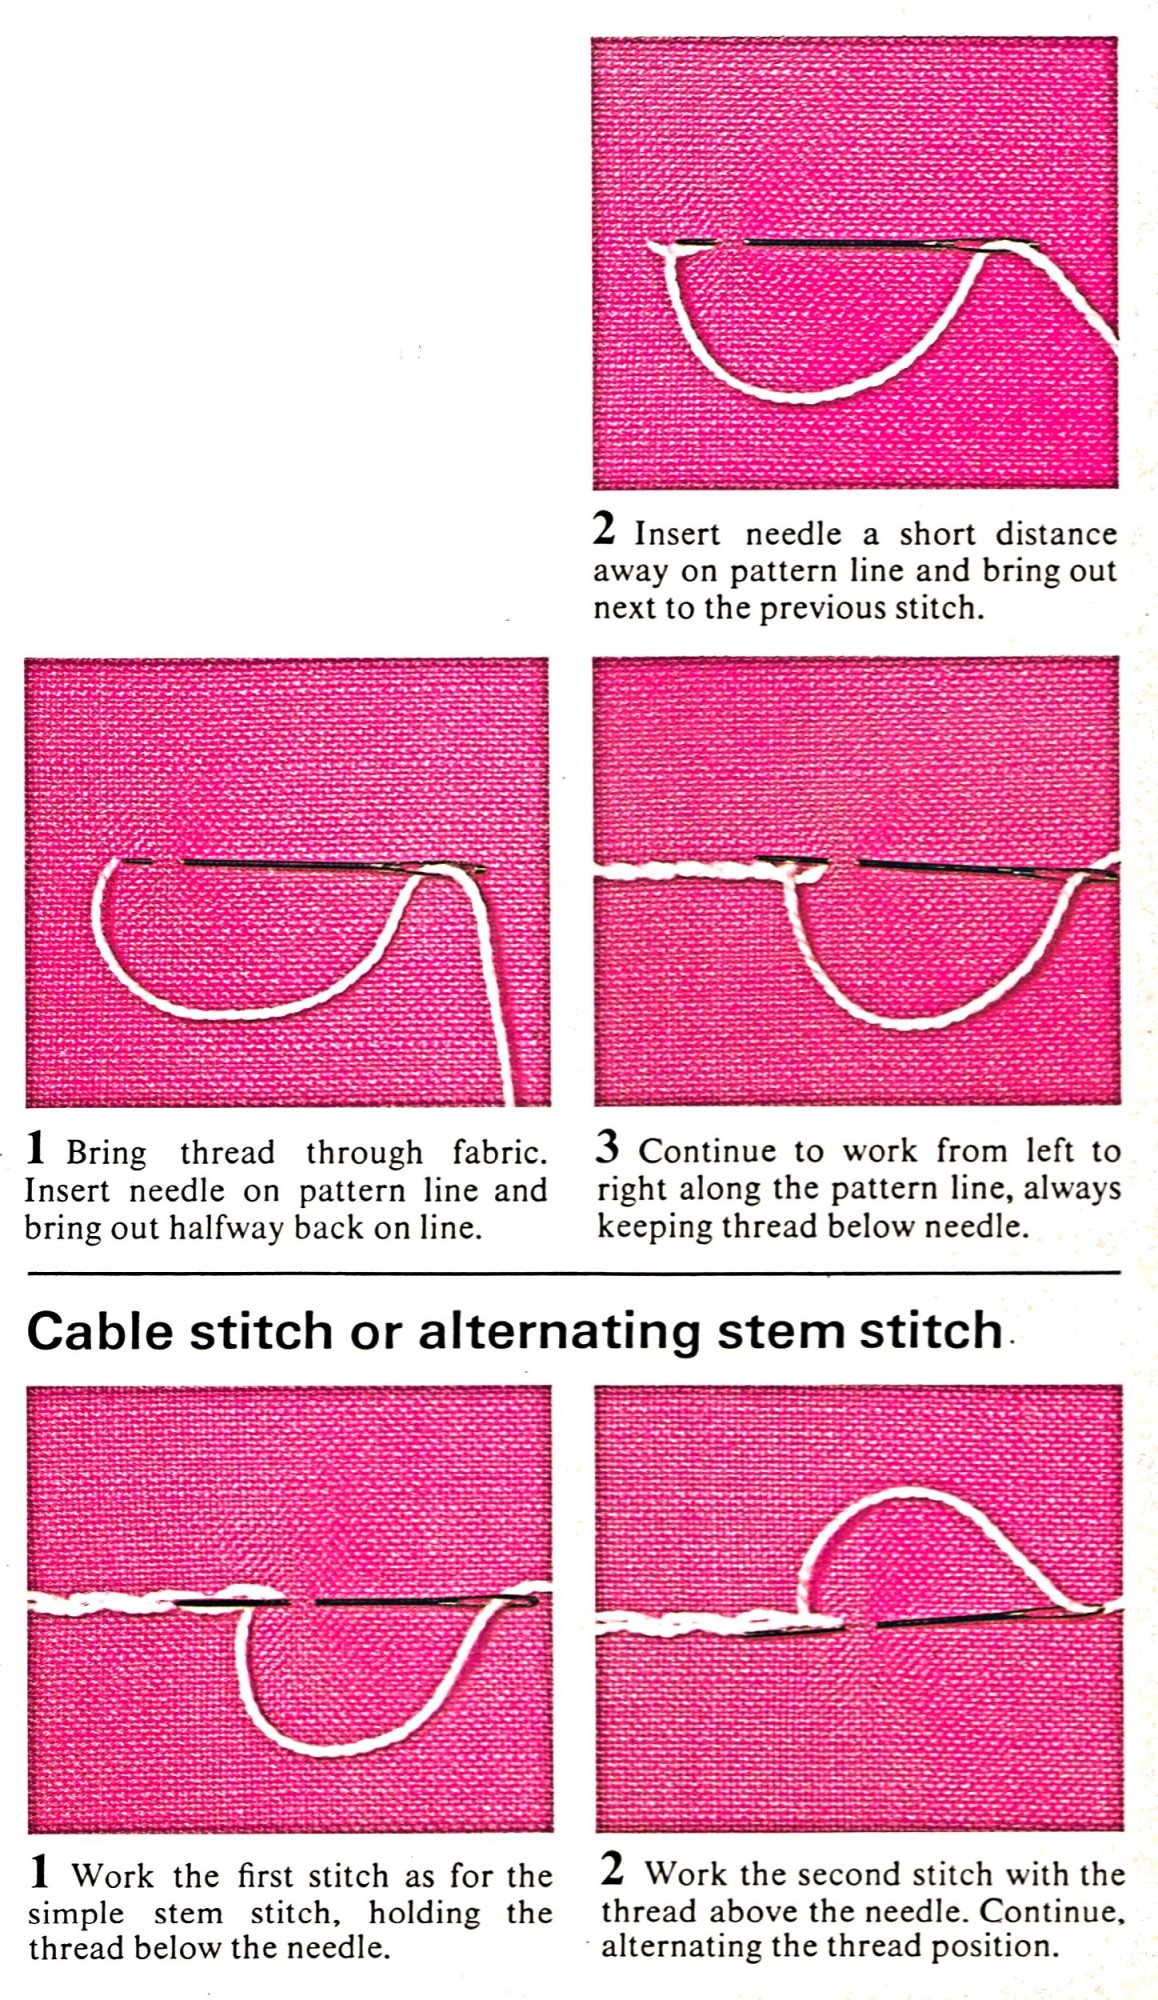 Embroidery Cross Sttich Blog Content stem stitch how to